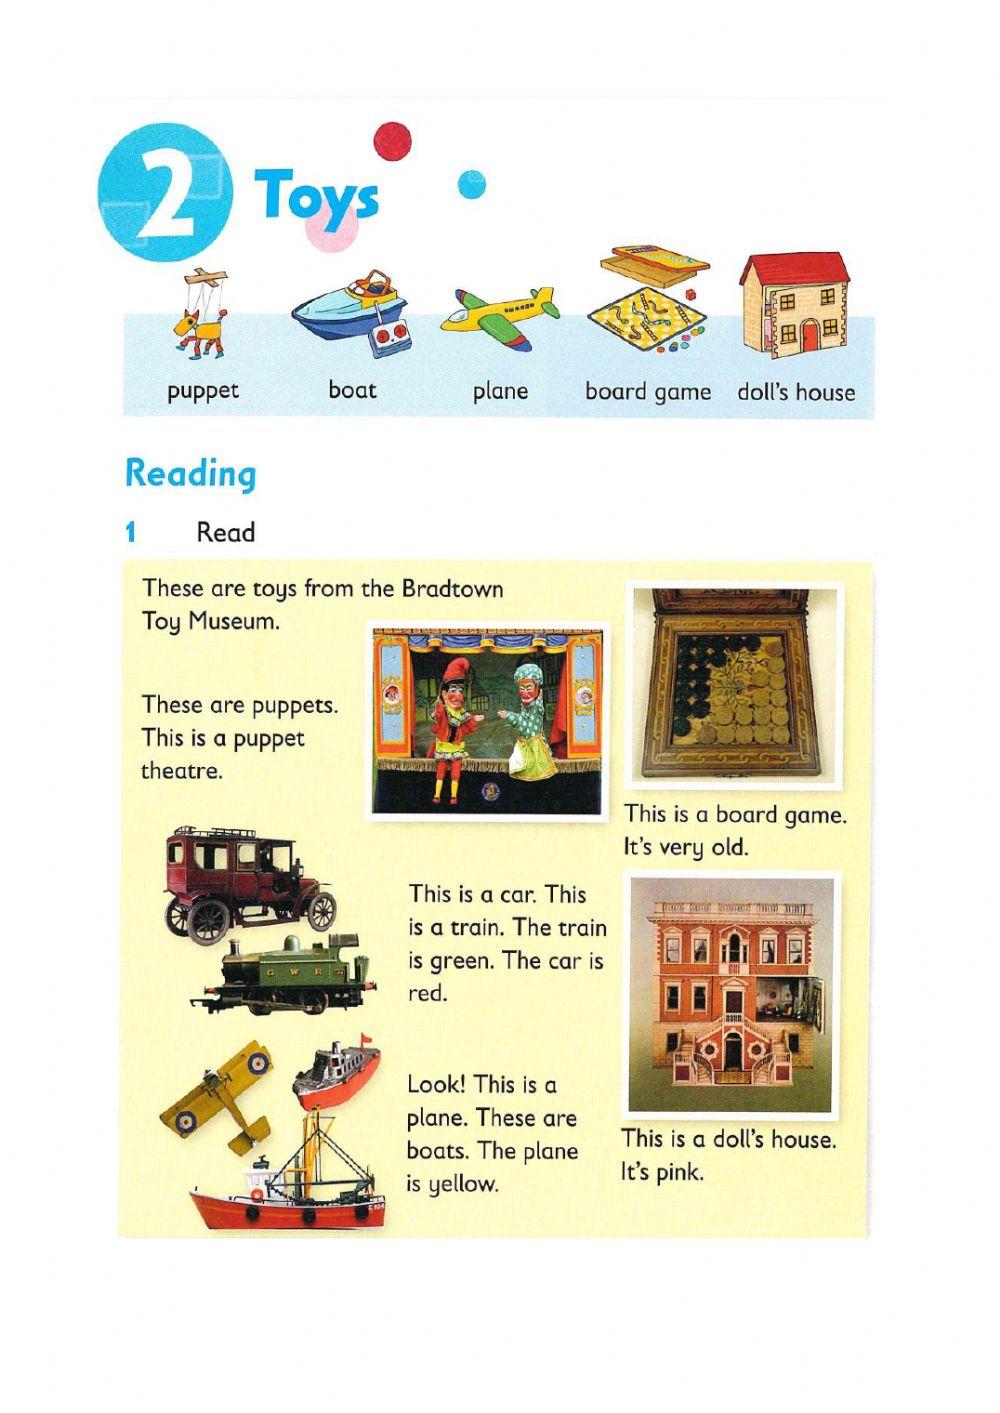 Reading and writing - toys